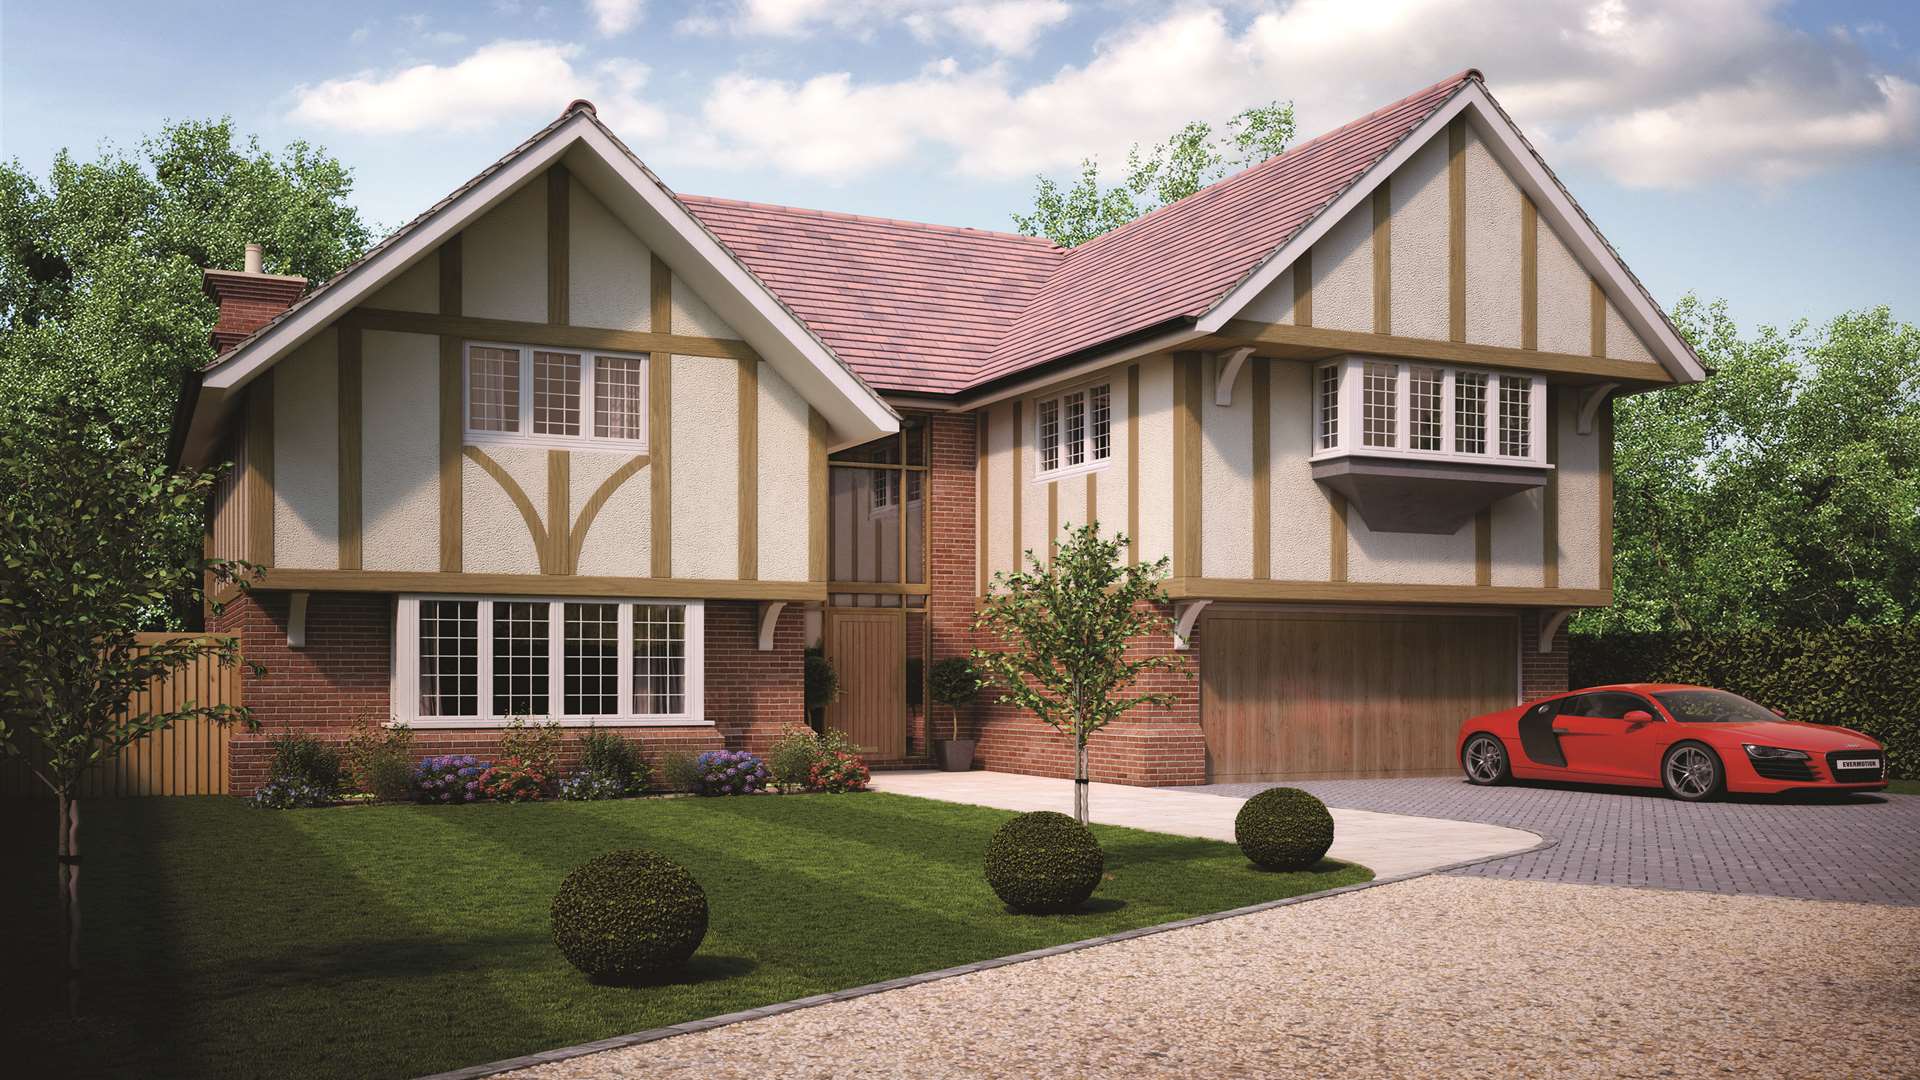 New build by Canham, two luxury homes in Sevenoaks